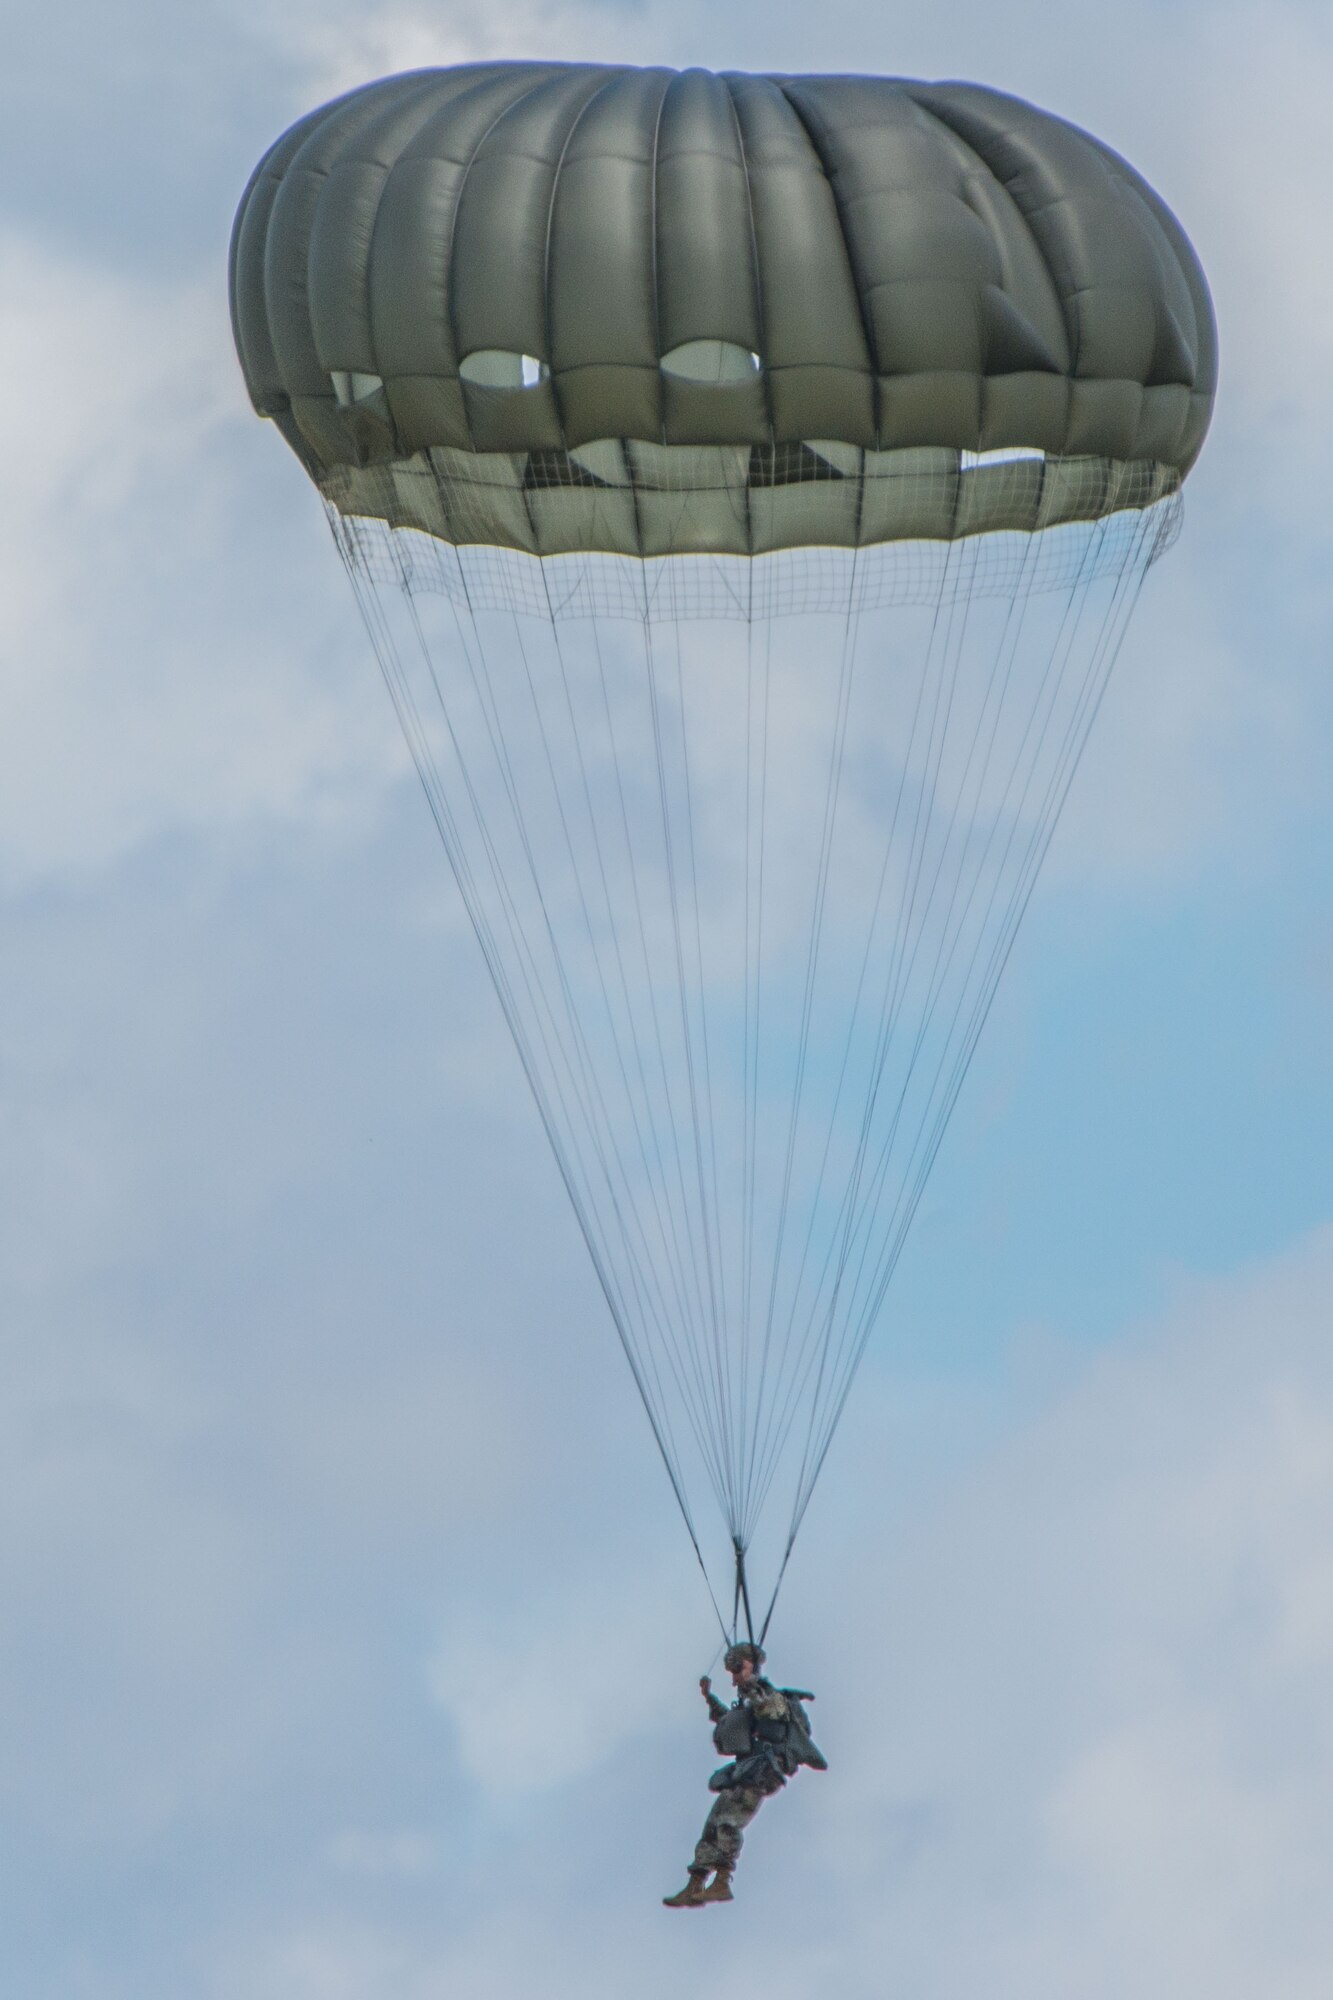 1-507th Parachute Infantry Regiment cadre from the Basic Airborne Course from Fort Benning parachutes out of a C-130 Hercules assigned to the 908th Airlift Wing here at Maxwell Air Force Base, Ala., July 7, 2016. The Airmen from the 908th AW and the Soldiers from the 1-507th PIR worked together to provide needed combat training that benefited both services.(U.S. Air Force photo by Trey Ward)